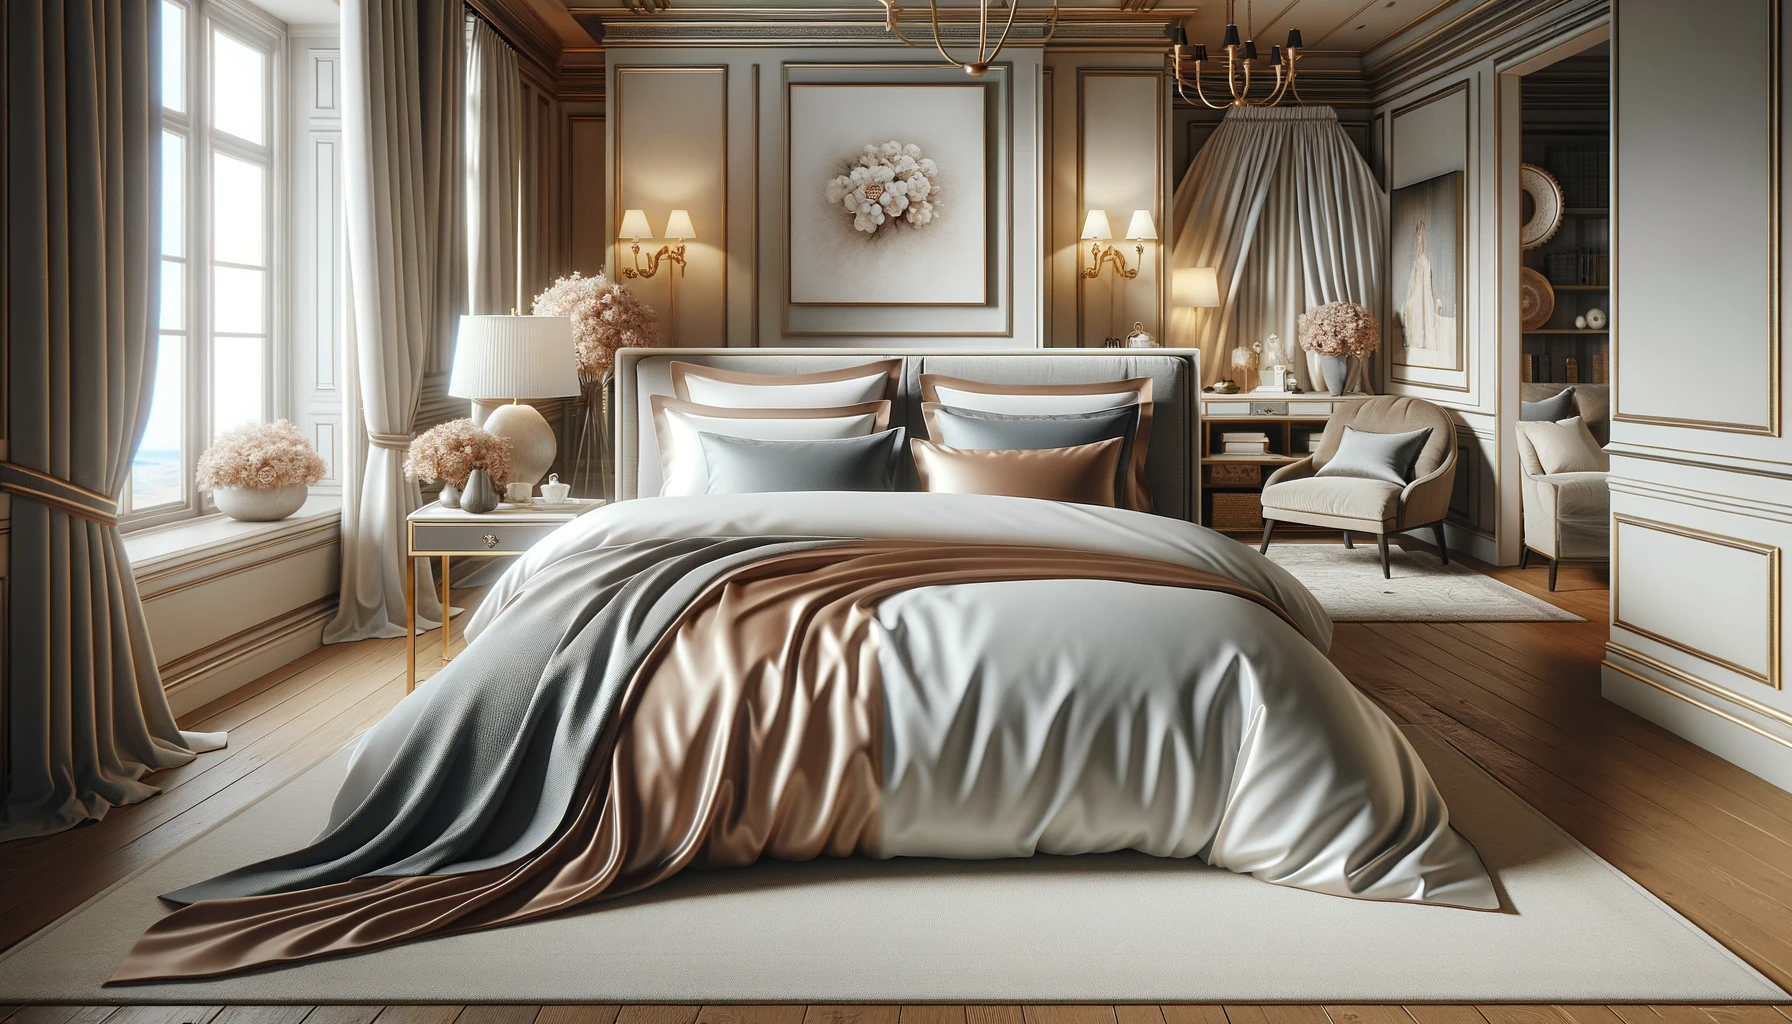 An elegant bedroom with a large bed adorned with plush Egyptian cotton bedding in a sophisticated color scheme, complemented by tasteful decor including a bedside lamp, fresh flowers, and wall art, embodying luxury and serenity.